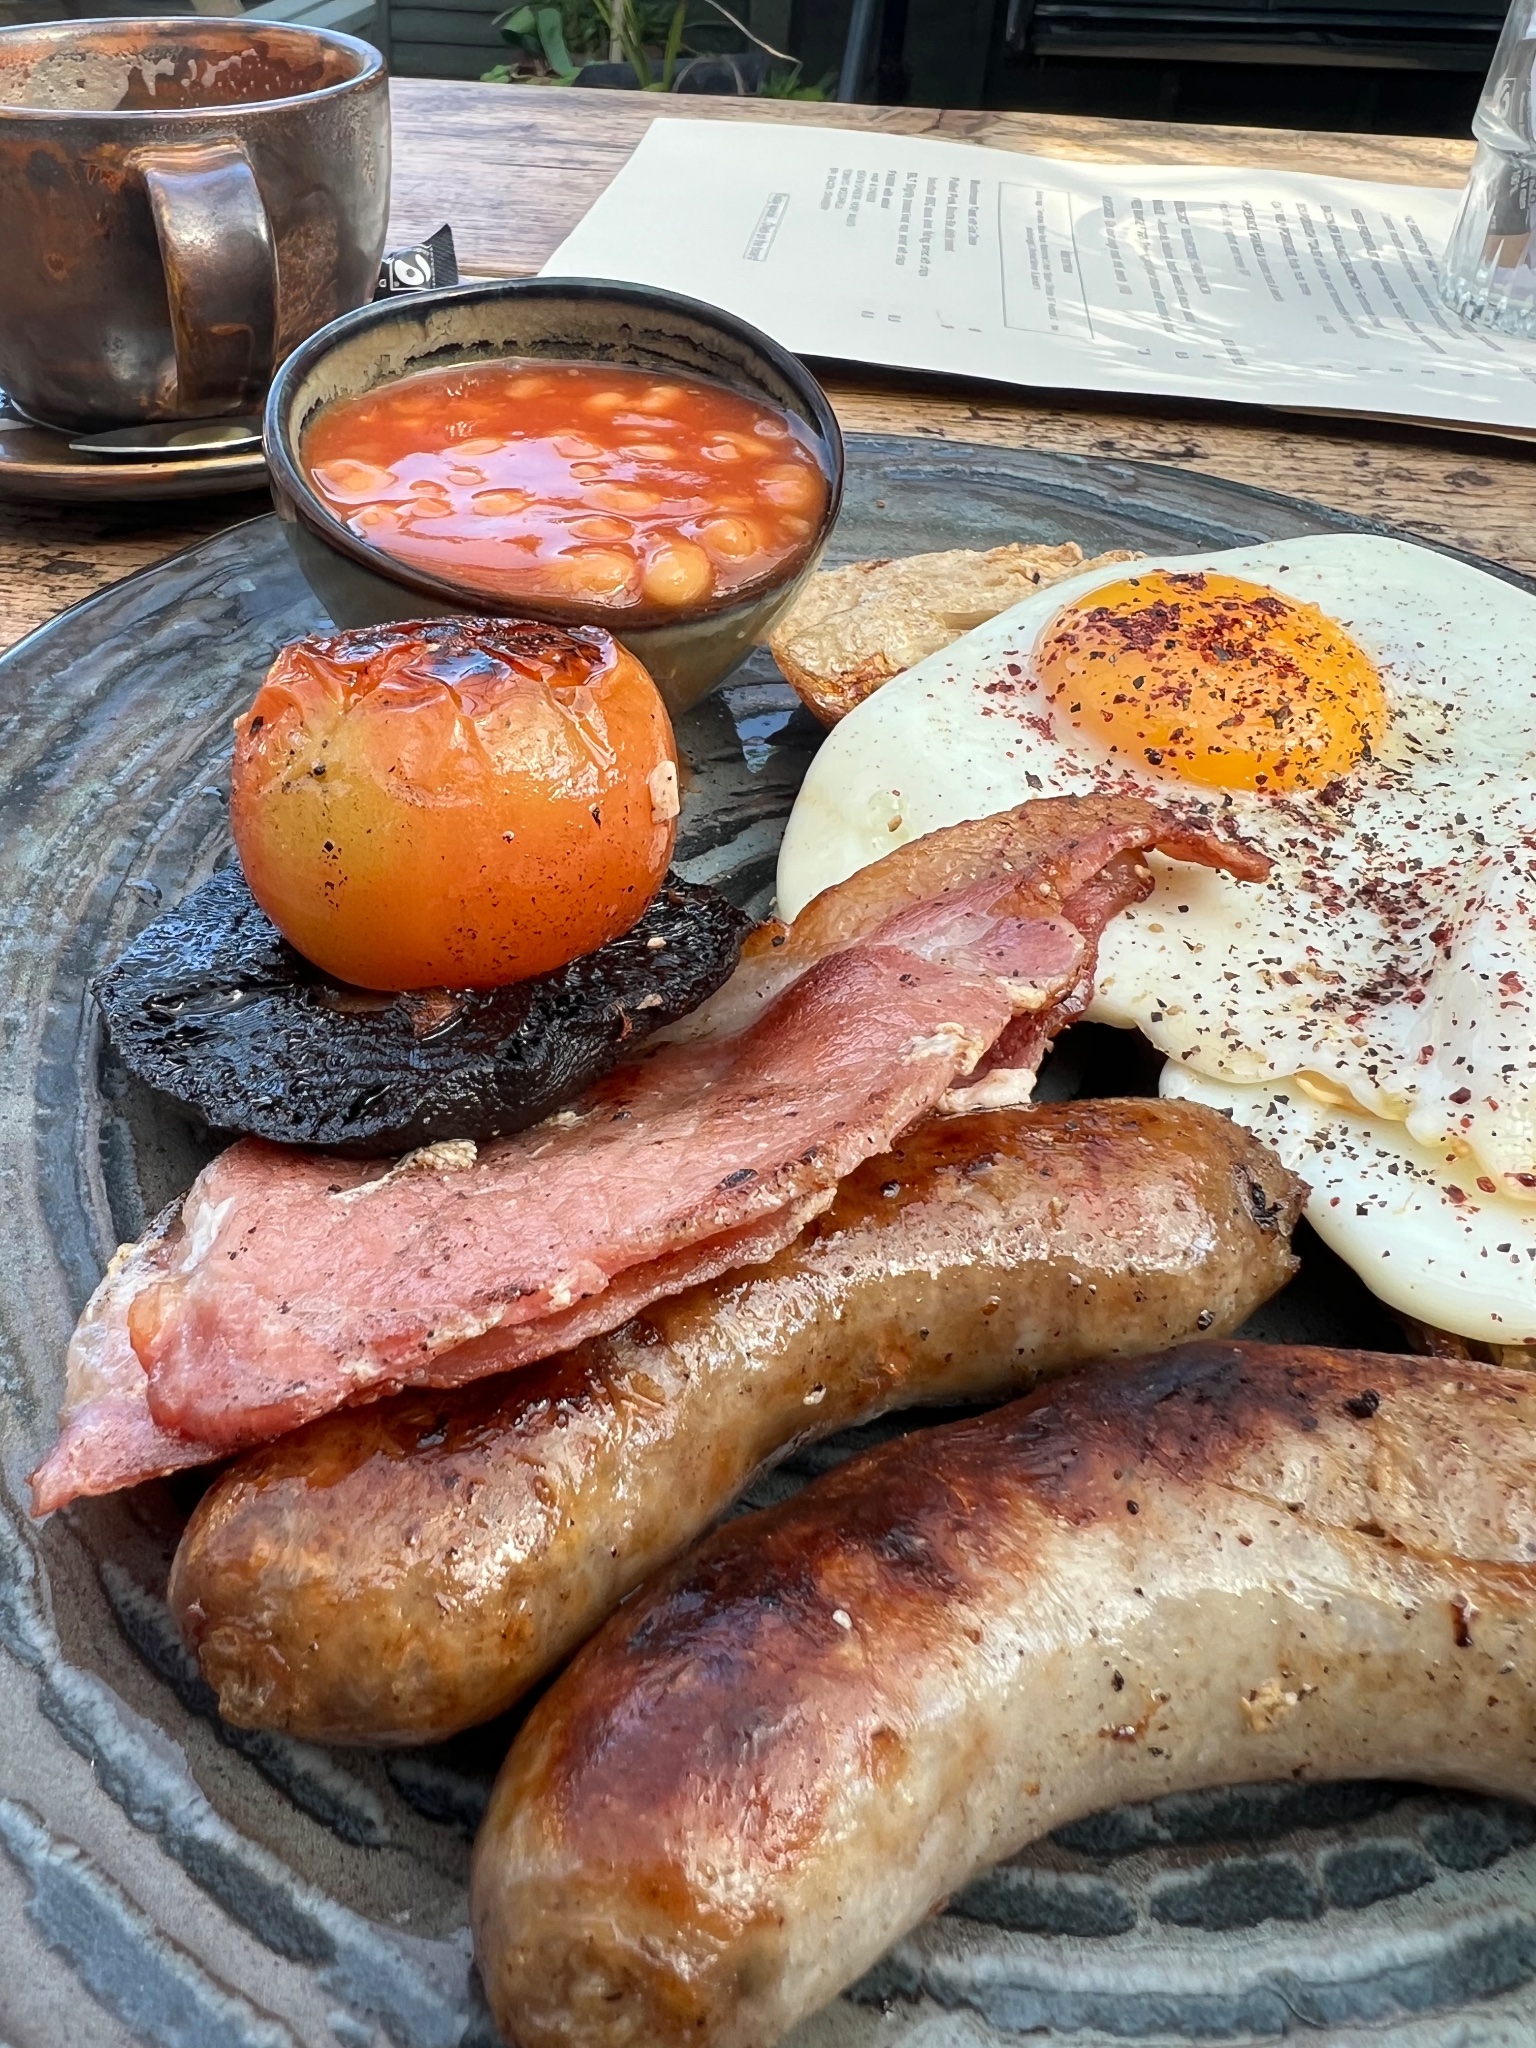 www.znewsservice.com ardent enthusiasts of traditional full english breakfast criticize lacklustre versions served abroad jam press jmp316974